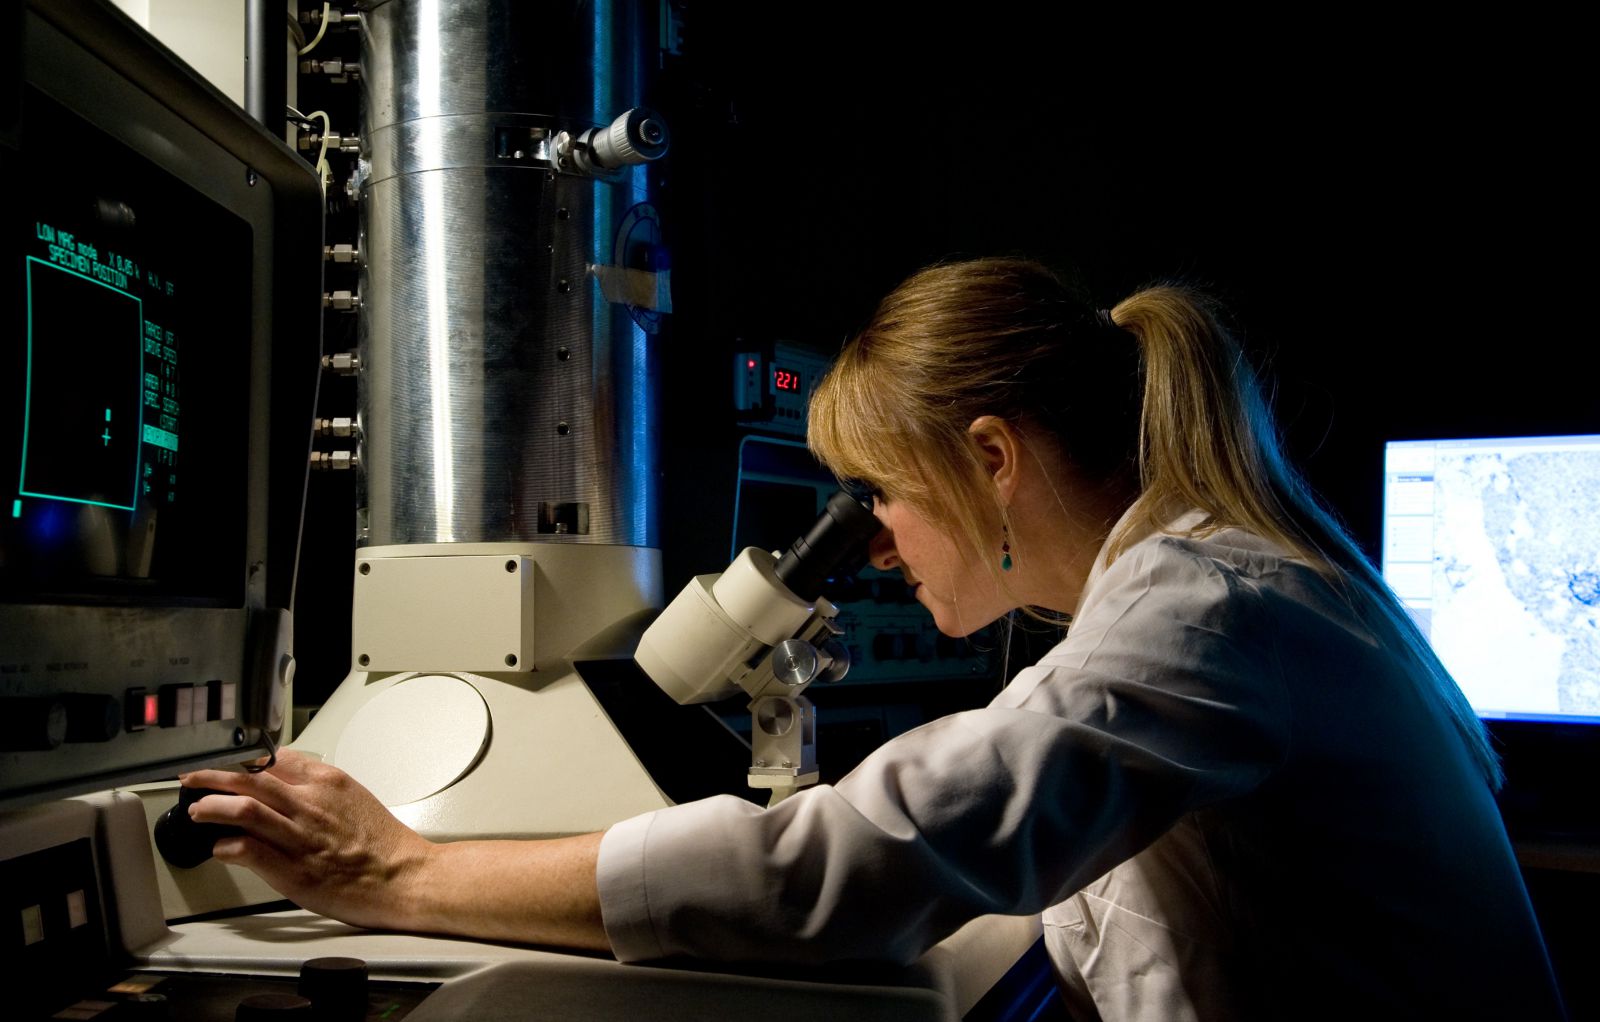 PhD student looks through a microscope in a science lab at the University of Sussex